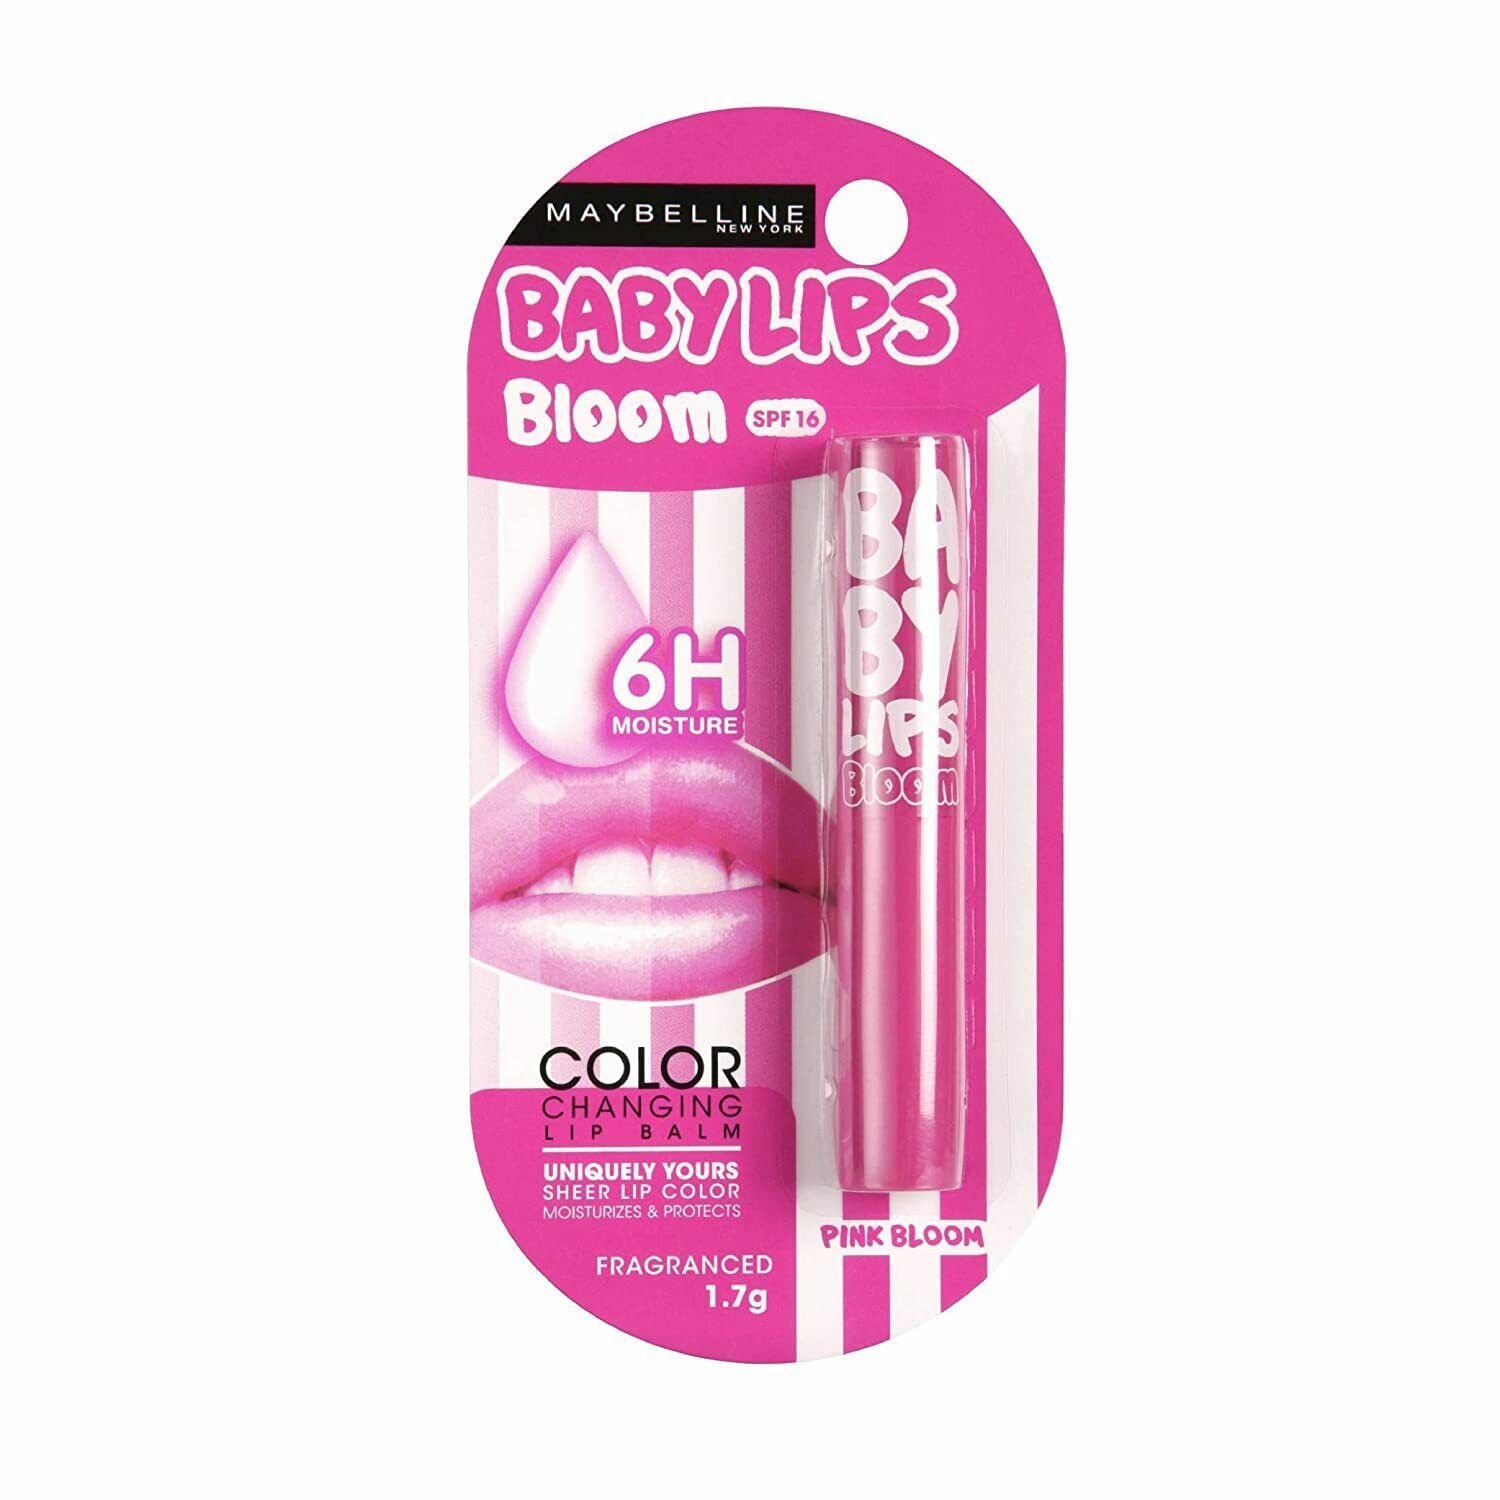 Maybelline New York Baby Lips Color Bloom SPF 16 - Pink Bloom, 1.7g (Pack of 1)